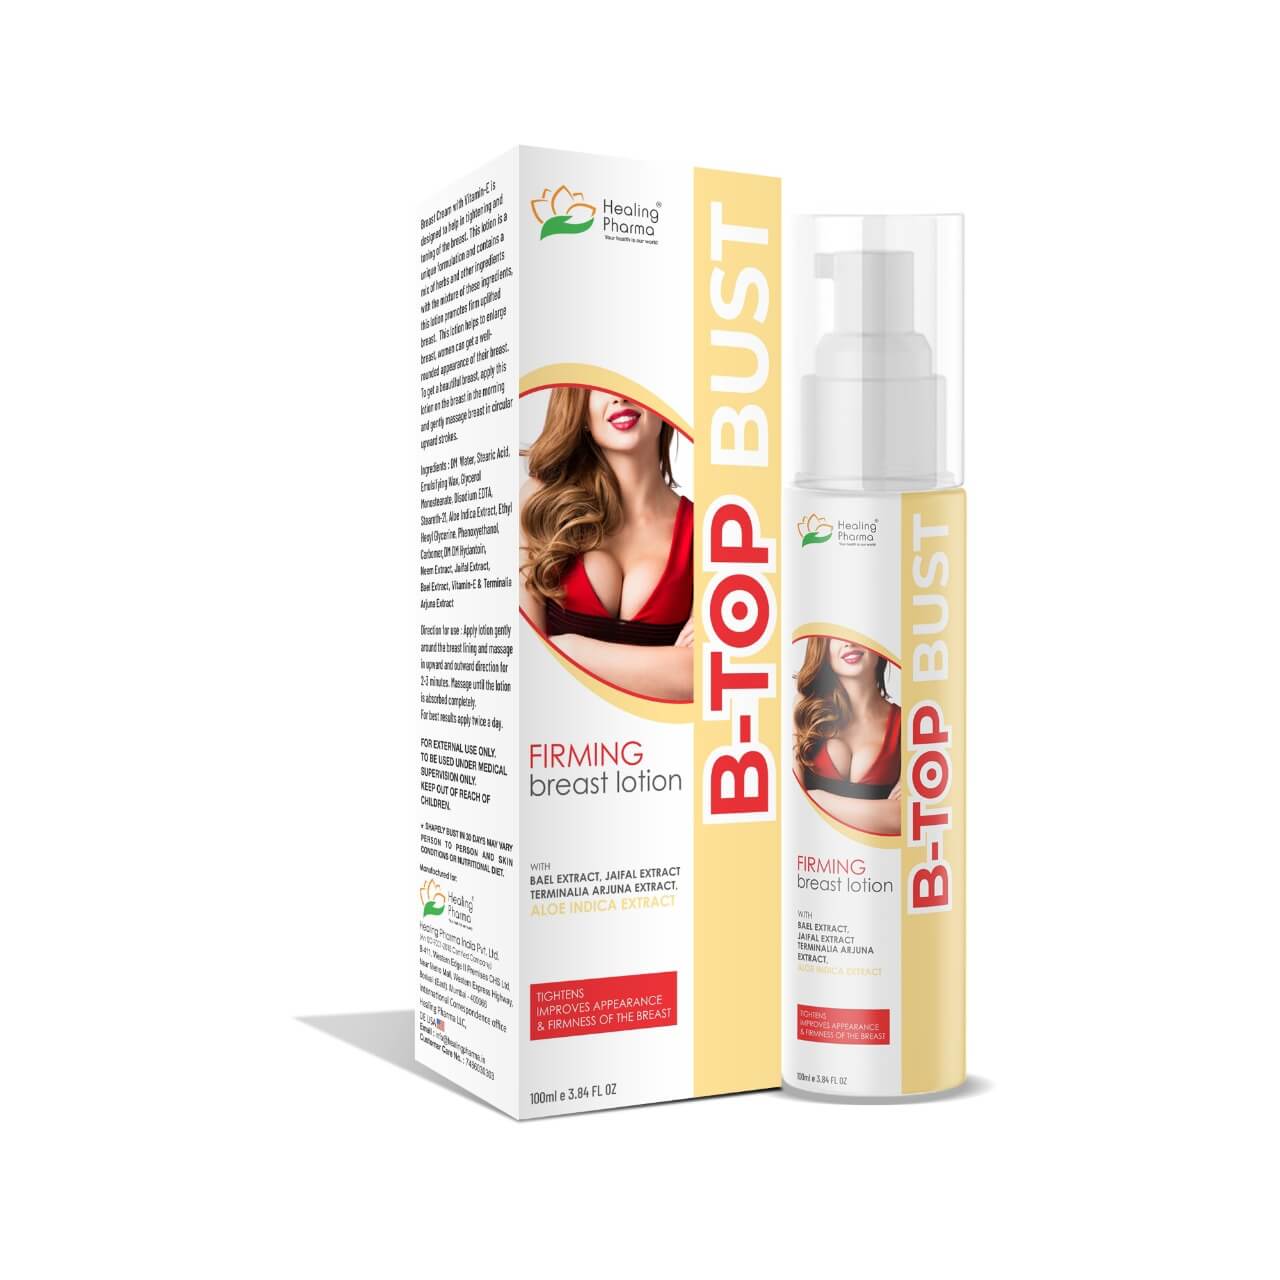 cucumis melo  Neo Hair Lotion uses Cucumis Melo Extract which is a form of  Vitamin B which is required to prevent hair loss and promote hair growth  This vitamin is 